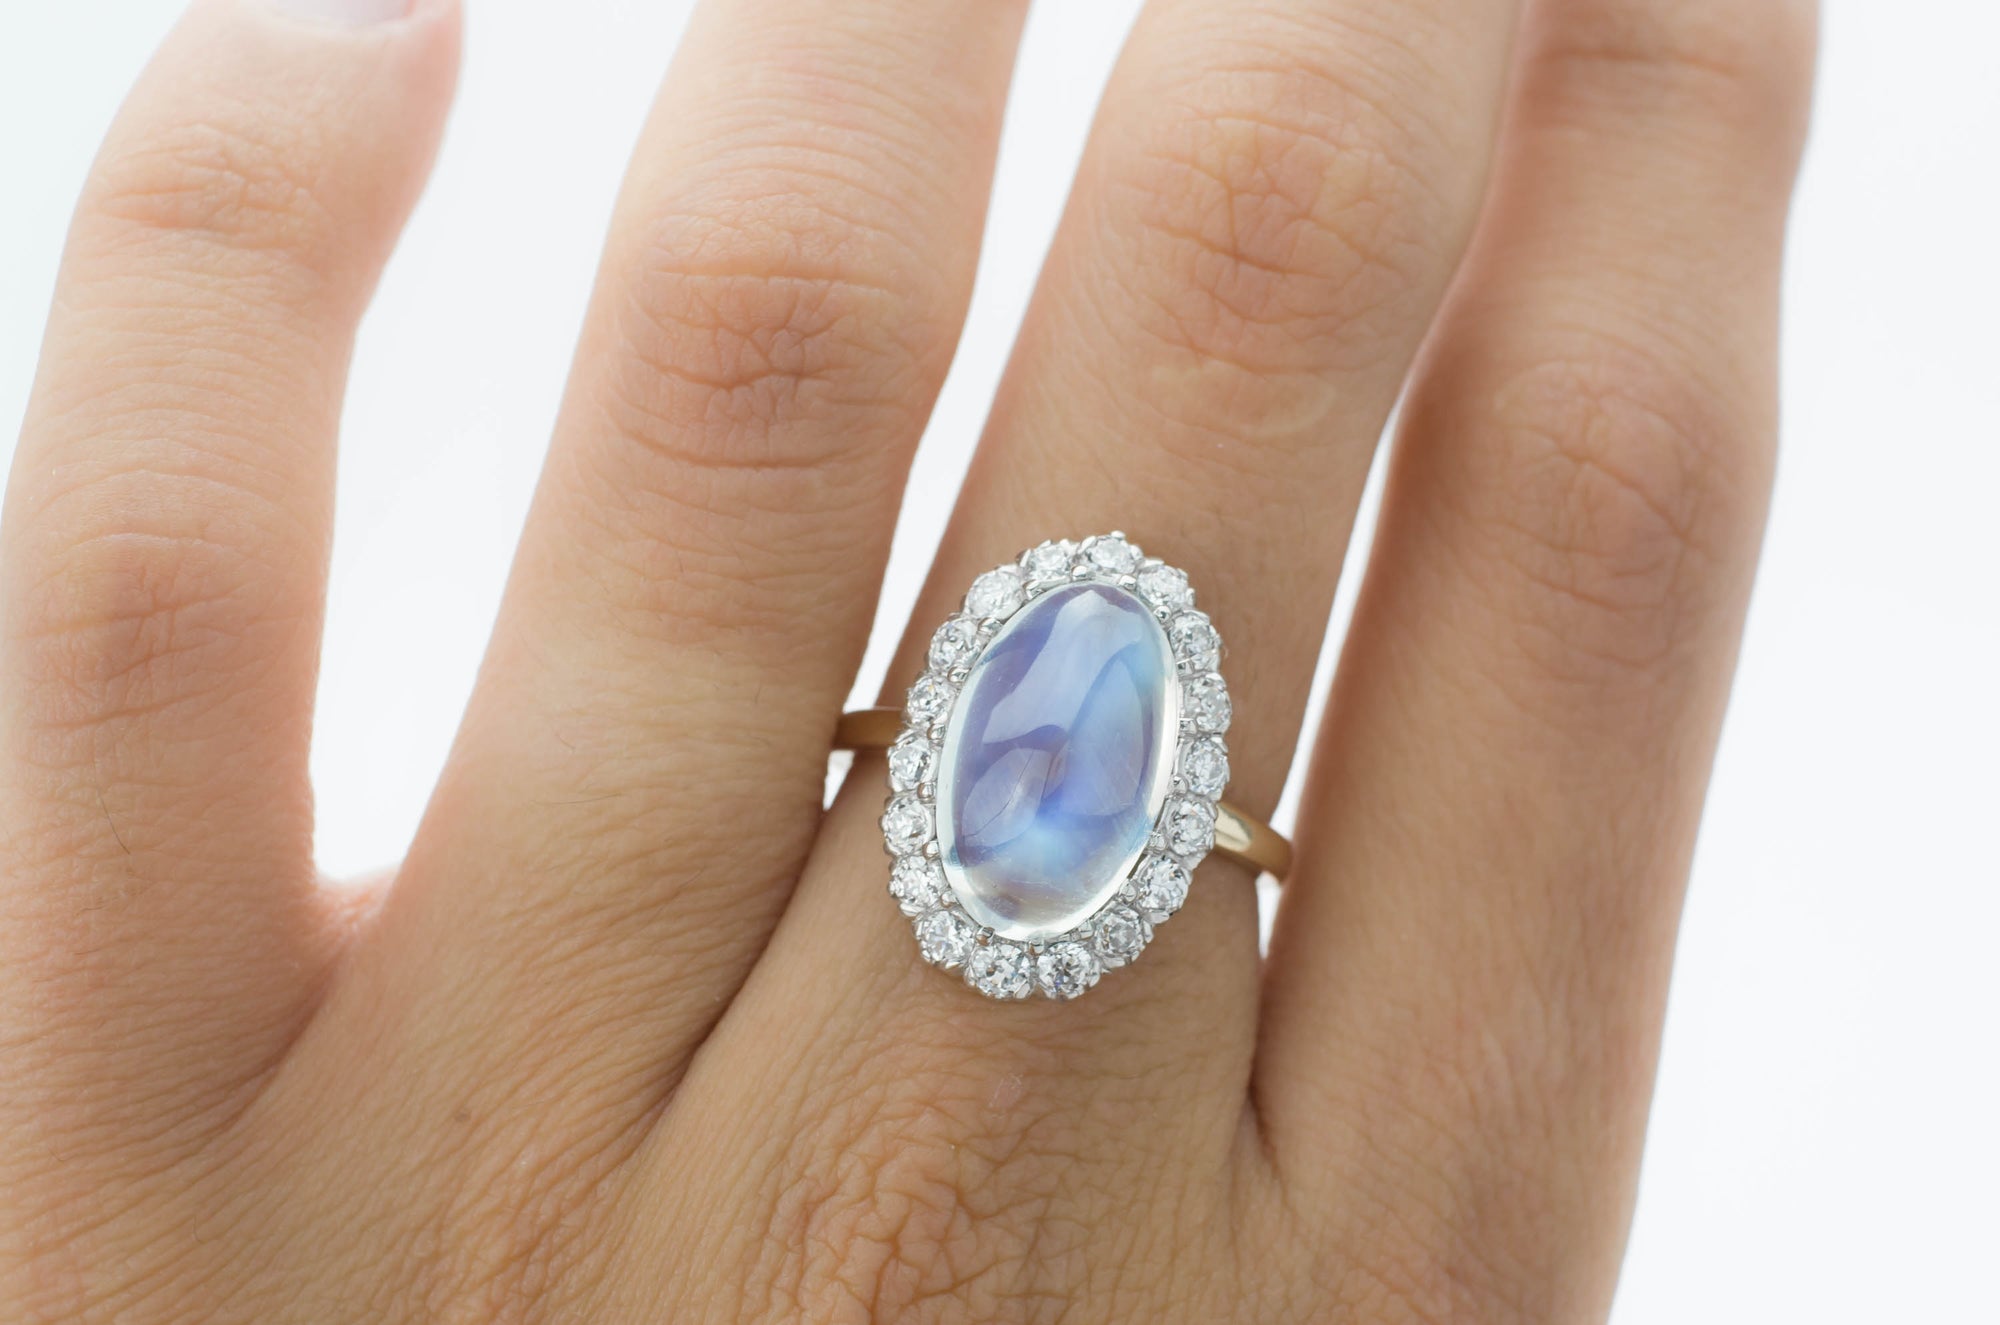 Half Moon Moonstone Ring | Discovered 9.45